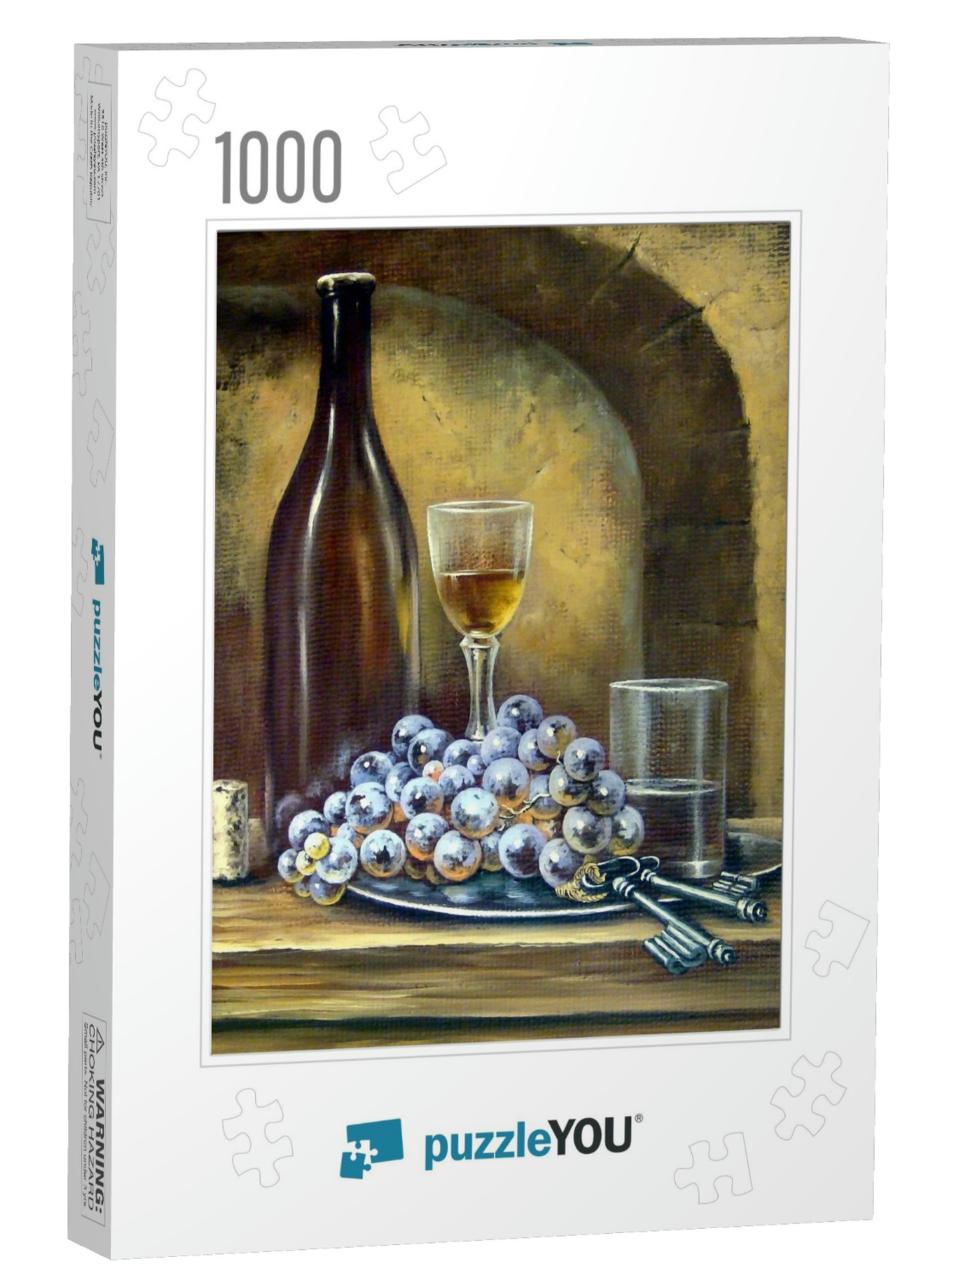 Oil Painting, Classical Still Life in the Old Style... Jigsaw Puzzle with 1000 pieces